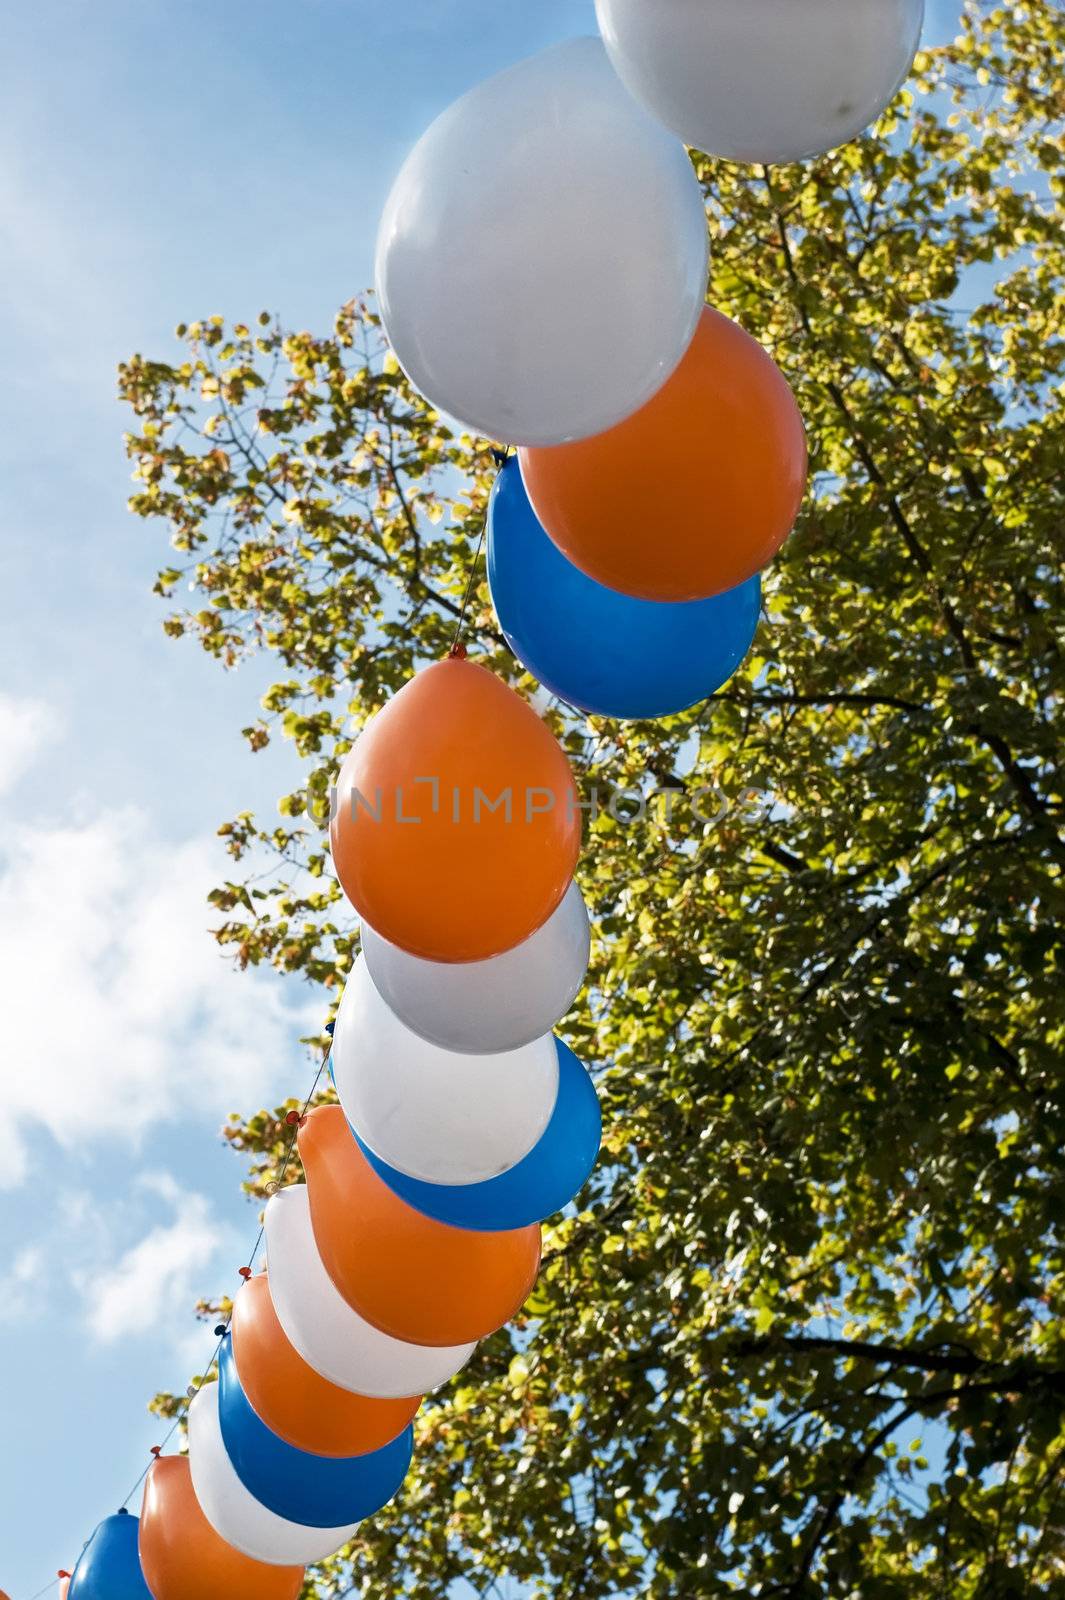 Blue, white and orange balloons hanging in line in front of a blue sky and a tree. Focus on the balloons in the middle.